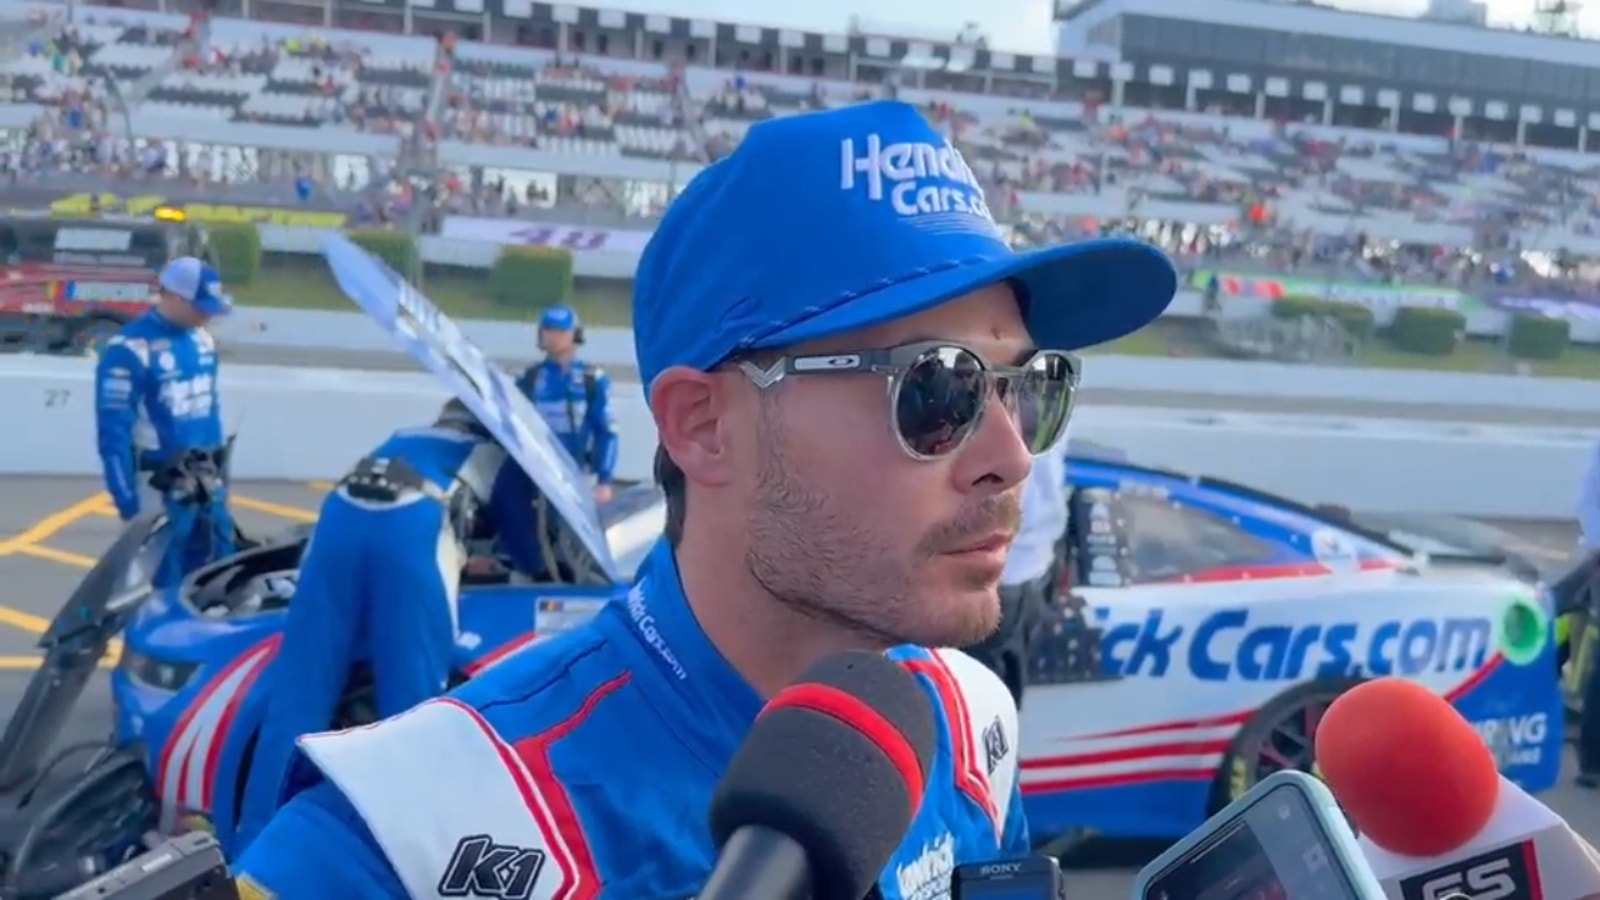 Kyle Larson gave his view of the Denny Hamlin move to take the lead and how this was different from their Kansas battle.